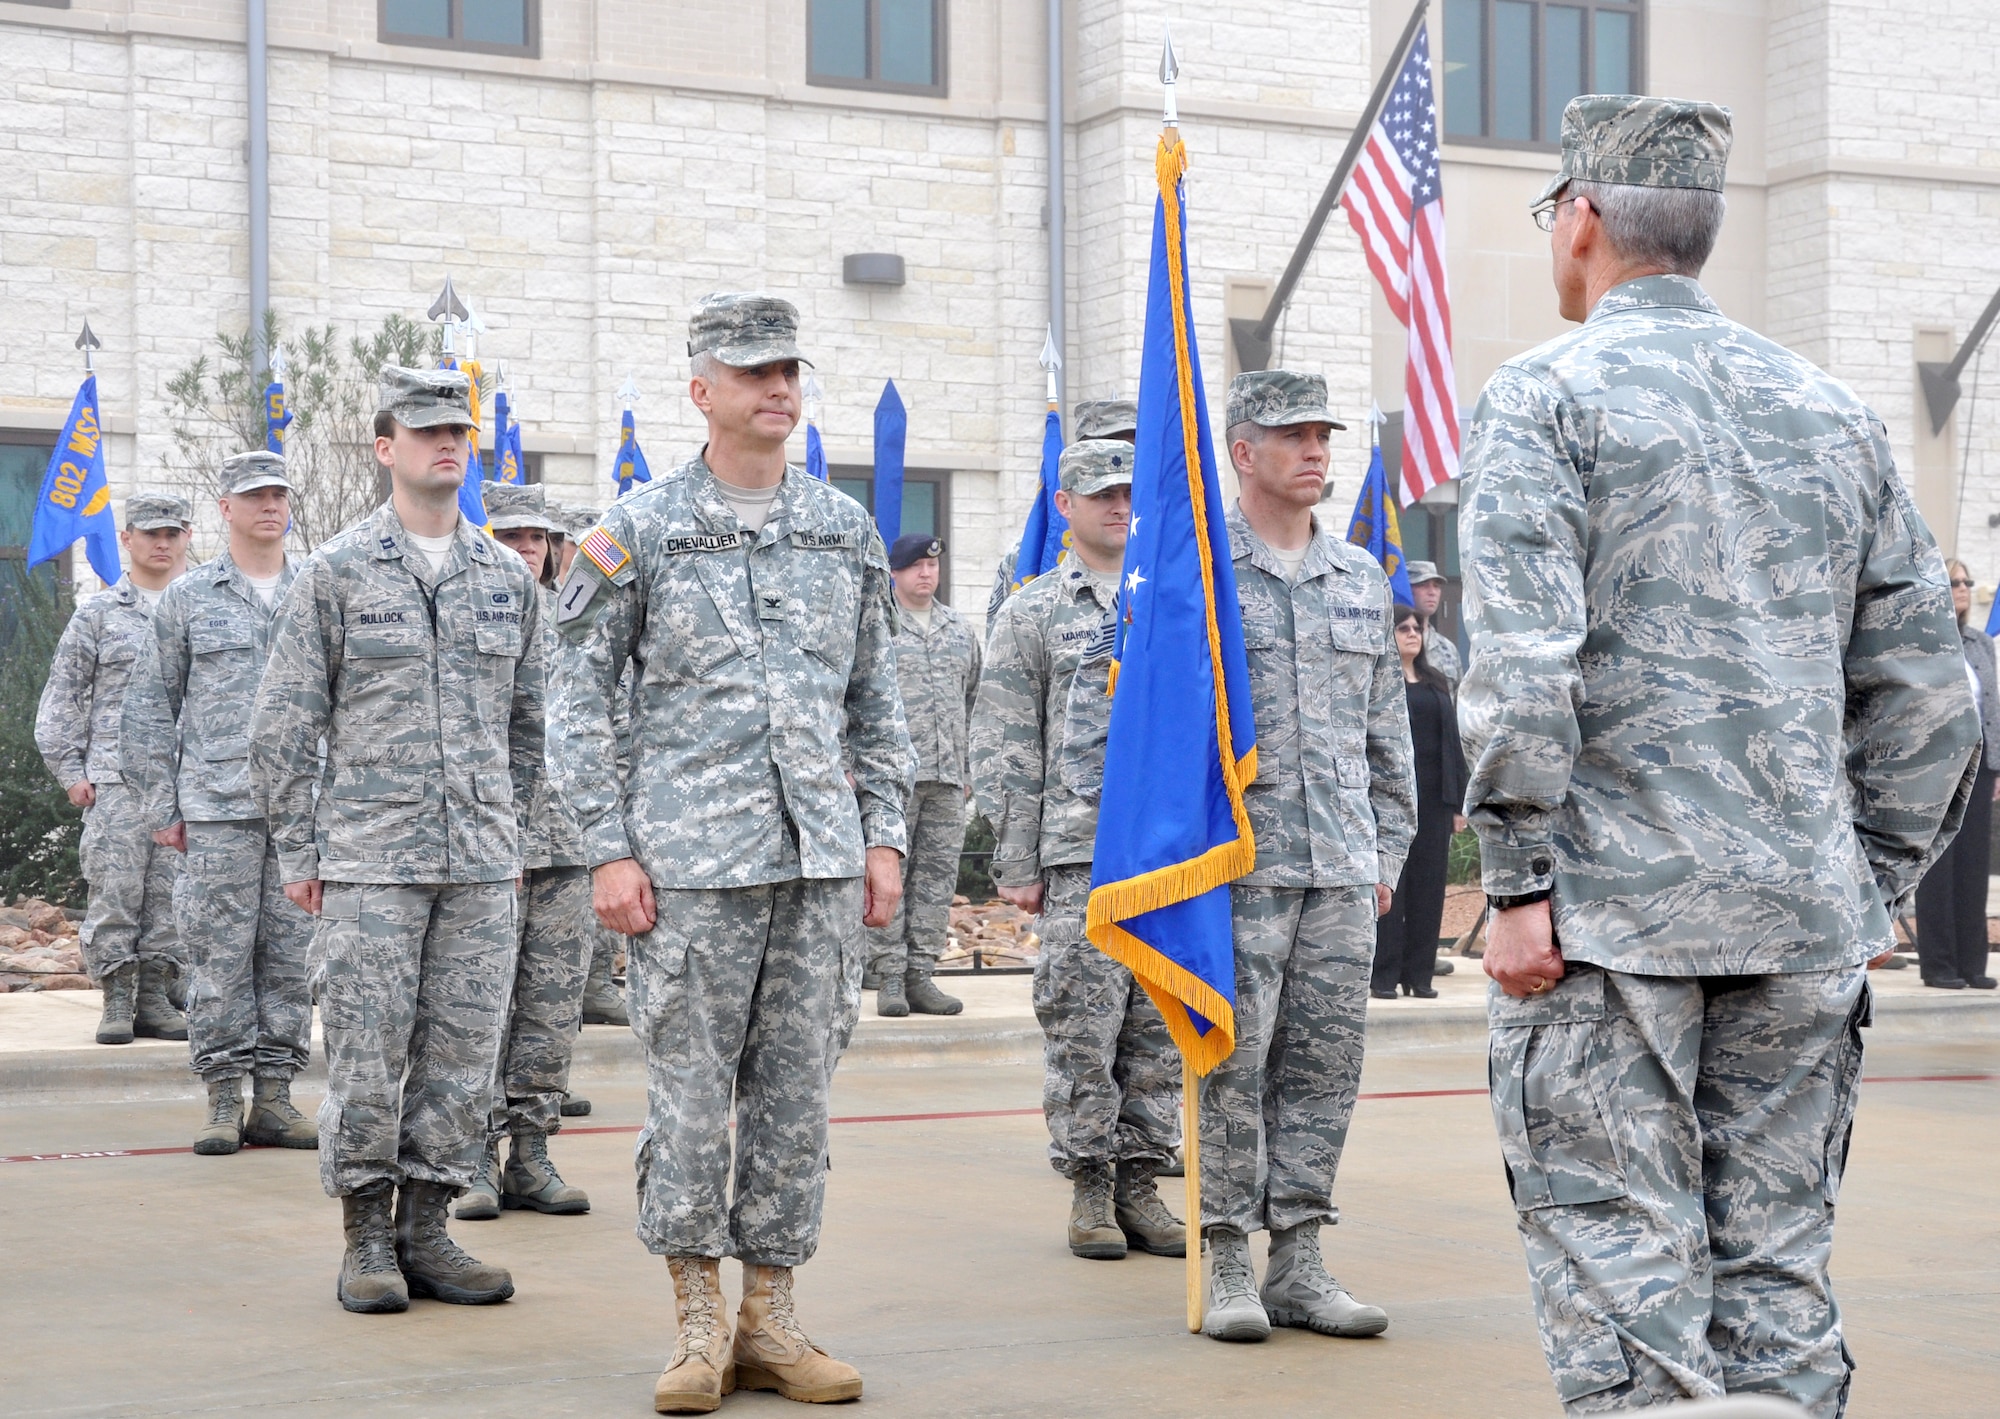 (From right) Brig. Gen. Bob LaBrutta, Joint Base San Antonio and 502nd Air Base Wing commander, receives the wing’s colors from Chief Master Sgt. Alexander Perry,  JBSA/502nd ABW command chief master sergeant; and Army Col. Jim Chevallier, JBSA/502nd ABW vice commander during the 502nd Air Base Wing transformation ceremony at Joint Base San Antonio-Fort Sam Houston Dec. 4. (U.S. Air Force photo by Steve Elliott)